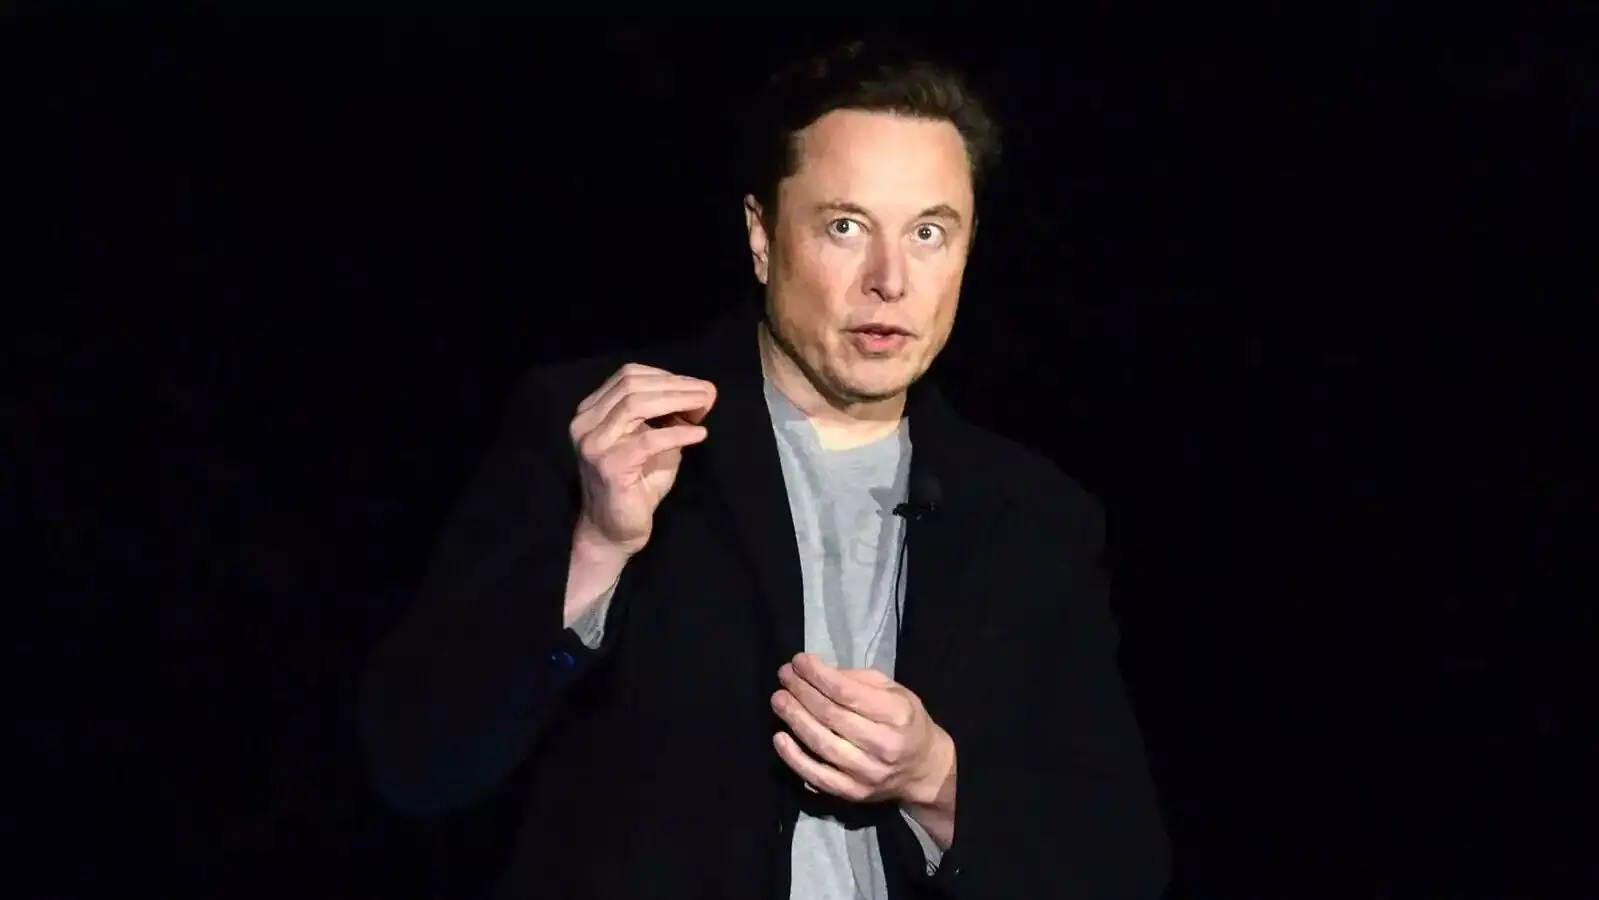 Elon Musk deletes tweet which compared Canadian PM to Adolf Hitler